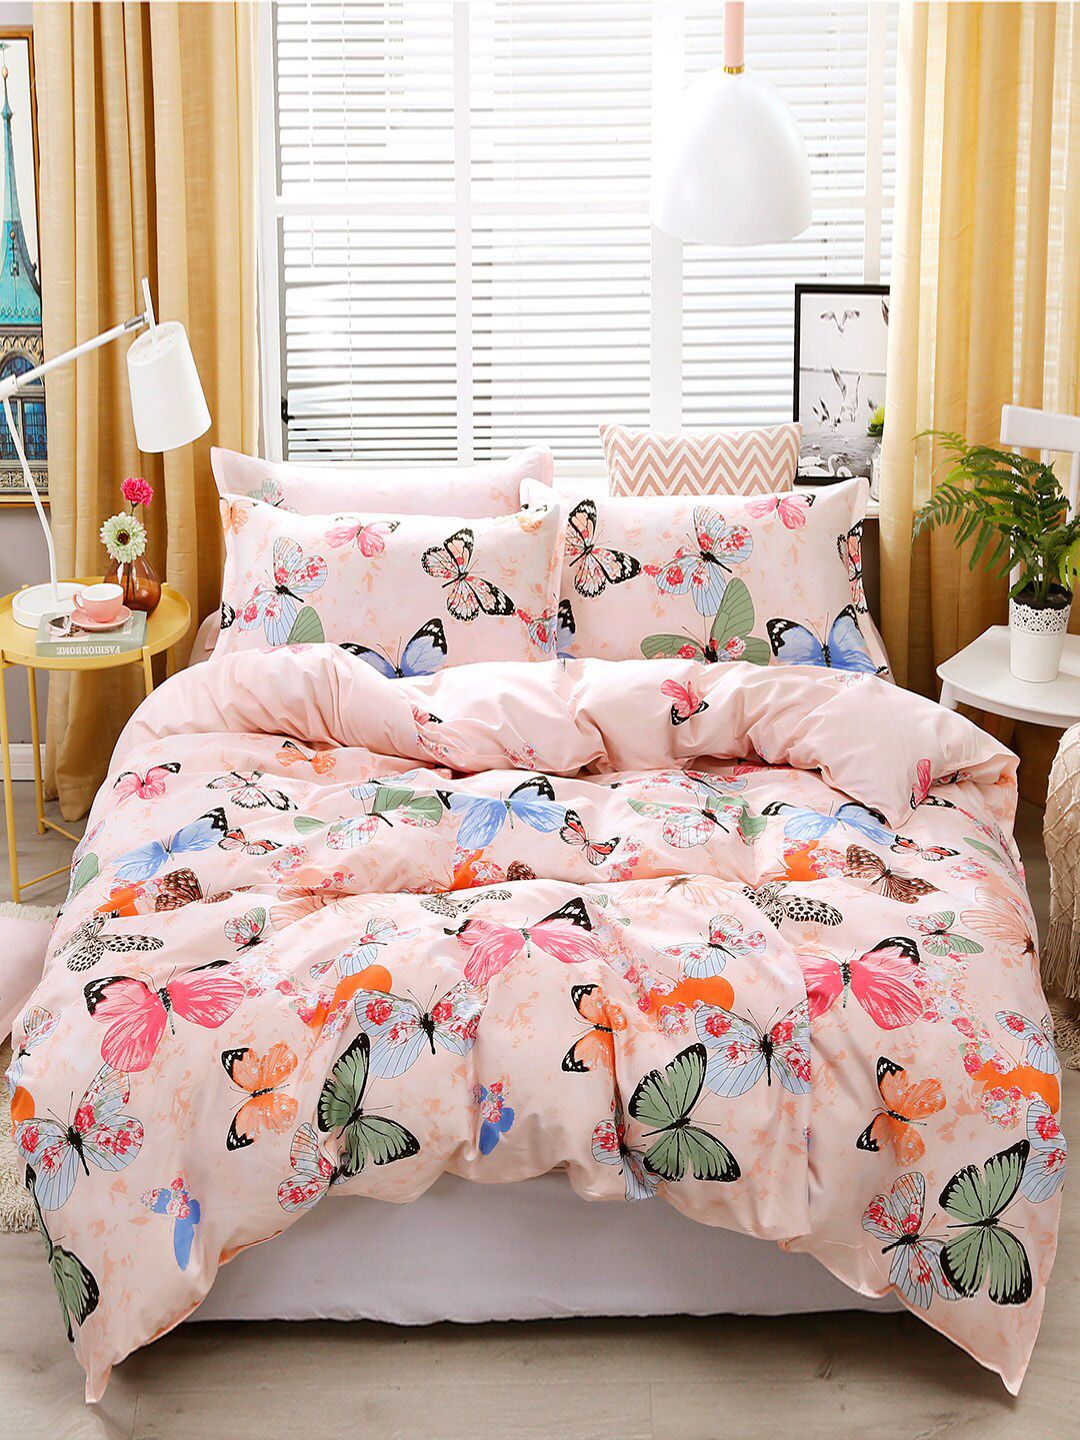 JC Collection Pink Printed Single Bedding Set With 1 Pillow & Quilt Cover Price in India